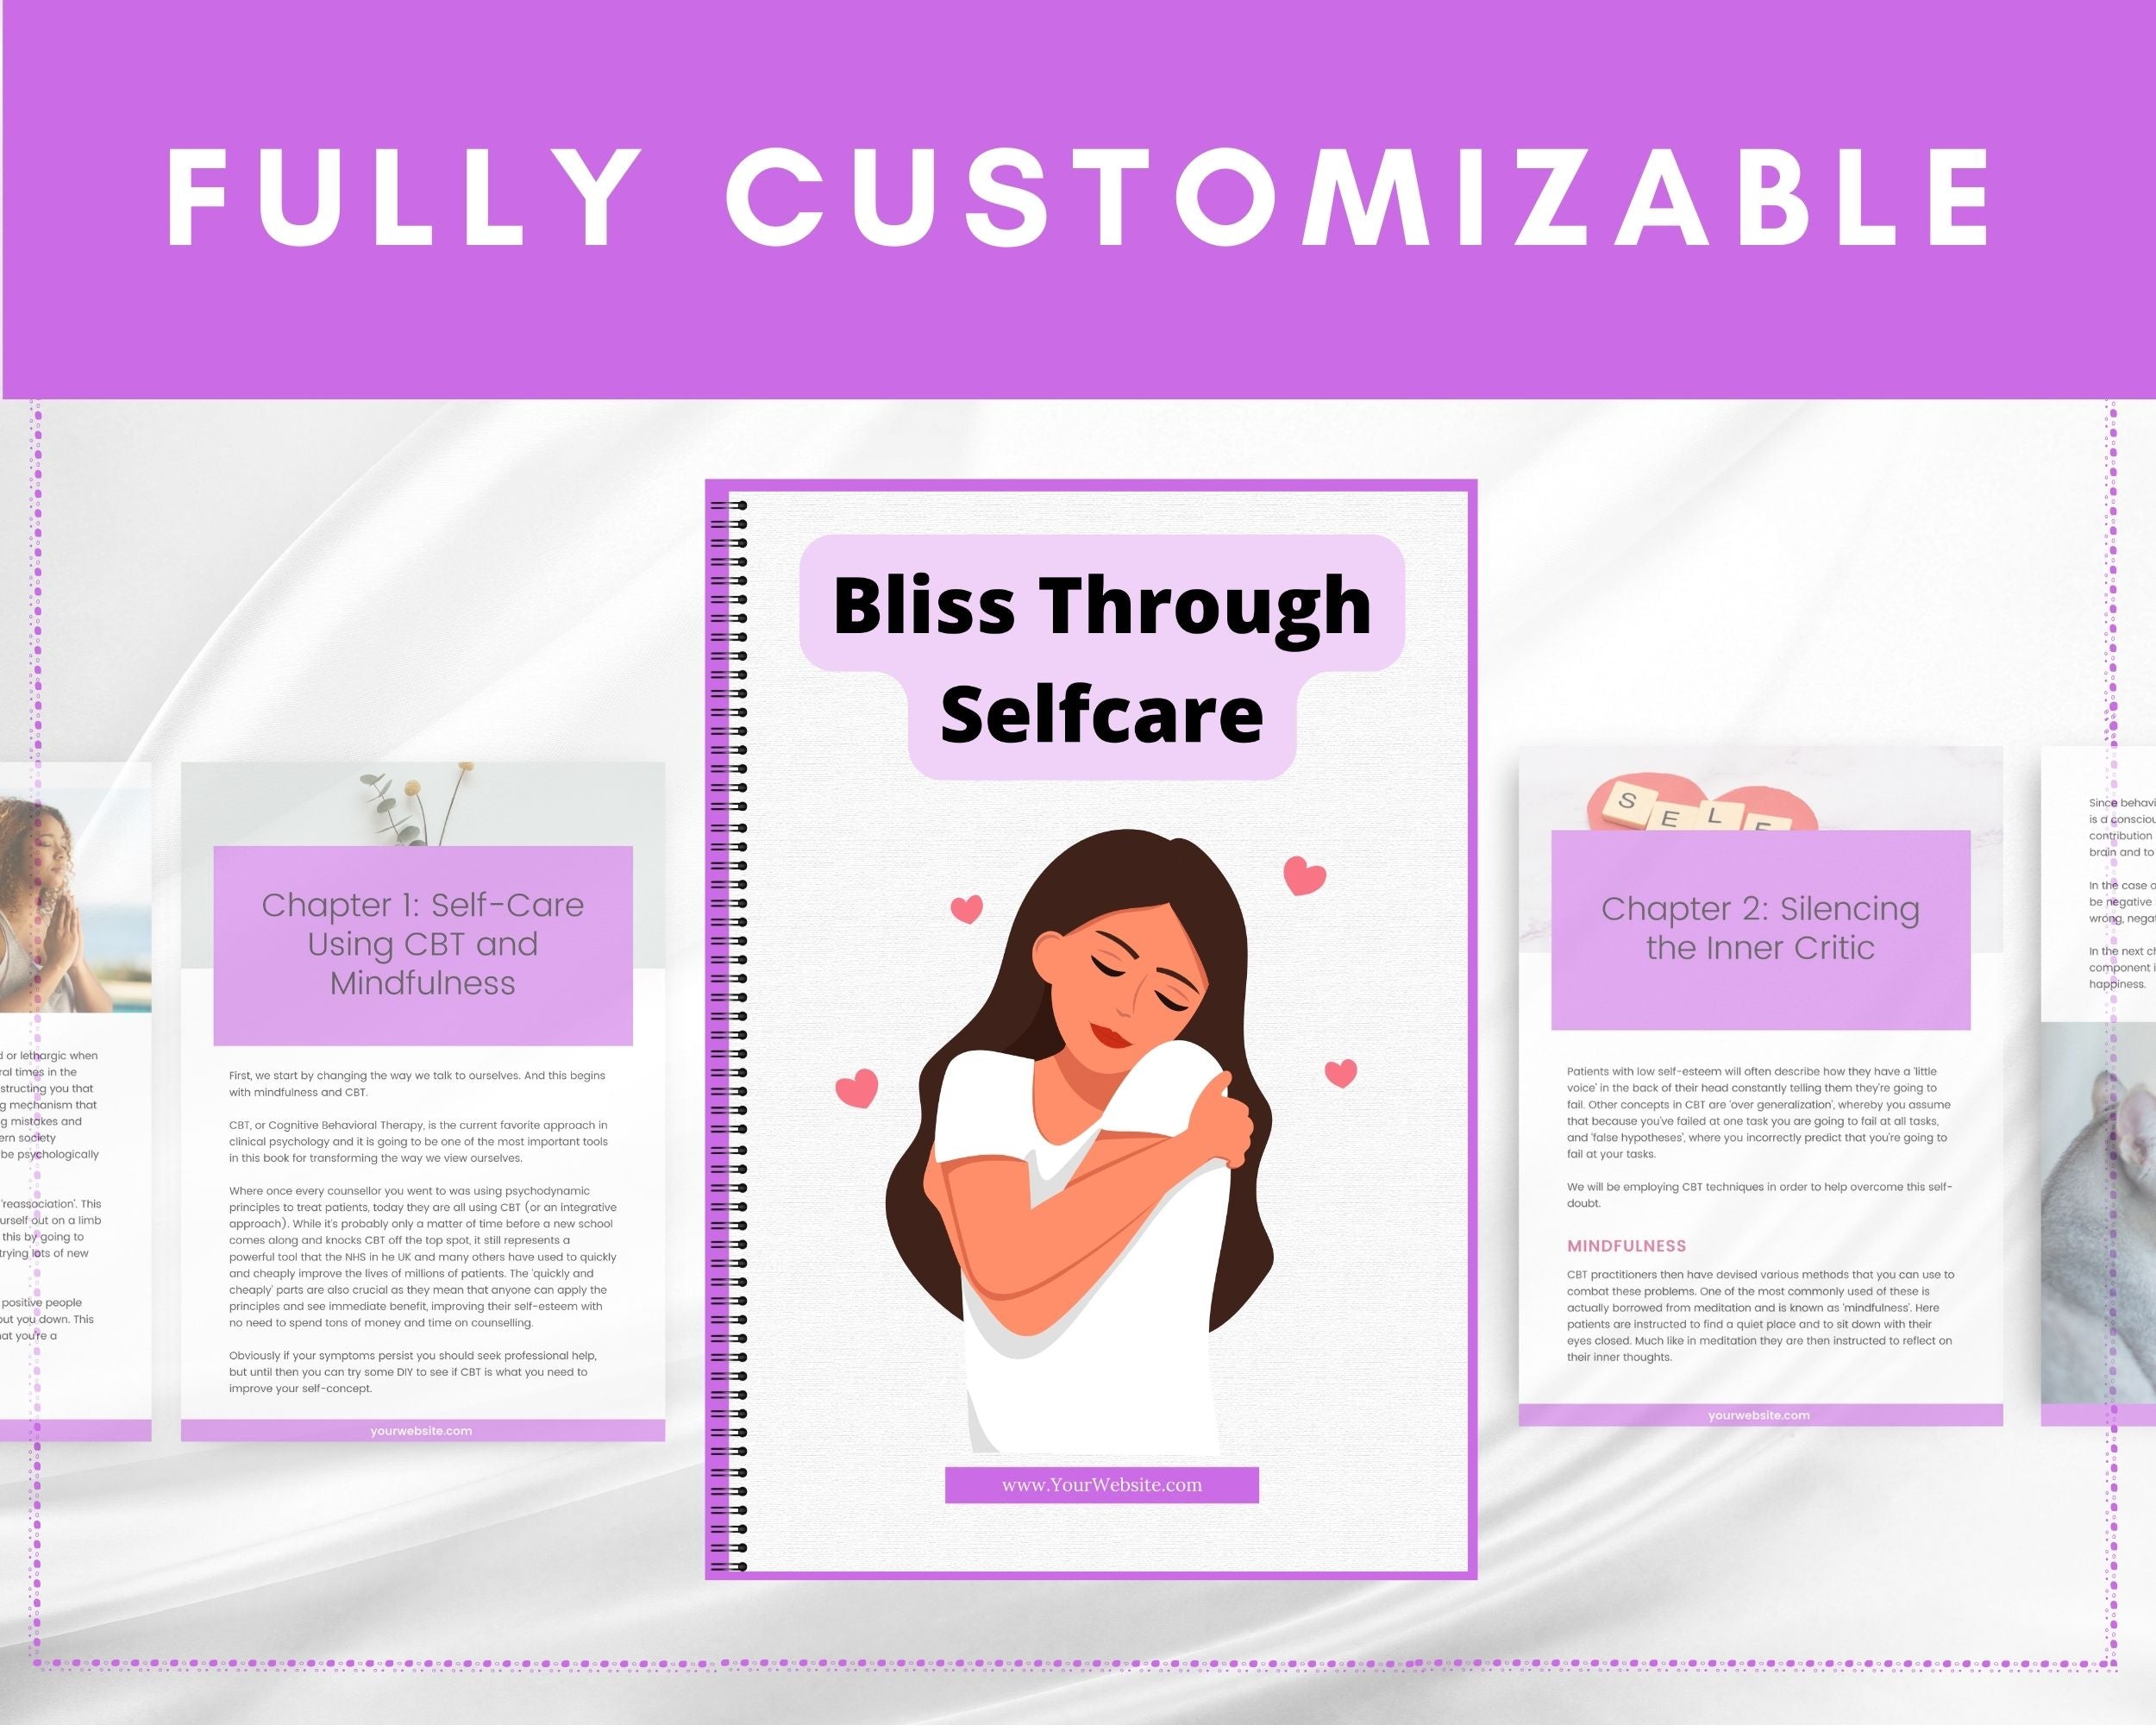 Editable Bliss Through Self-Care Ebook | Done-for-You Ebook in Canva | Rebrandable and Resizable Canva Template